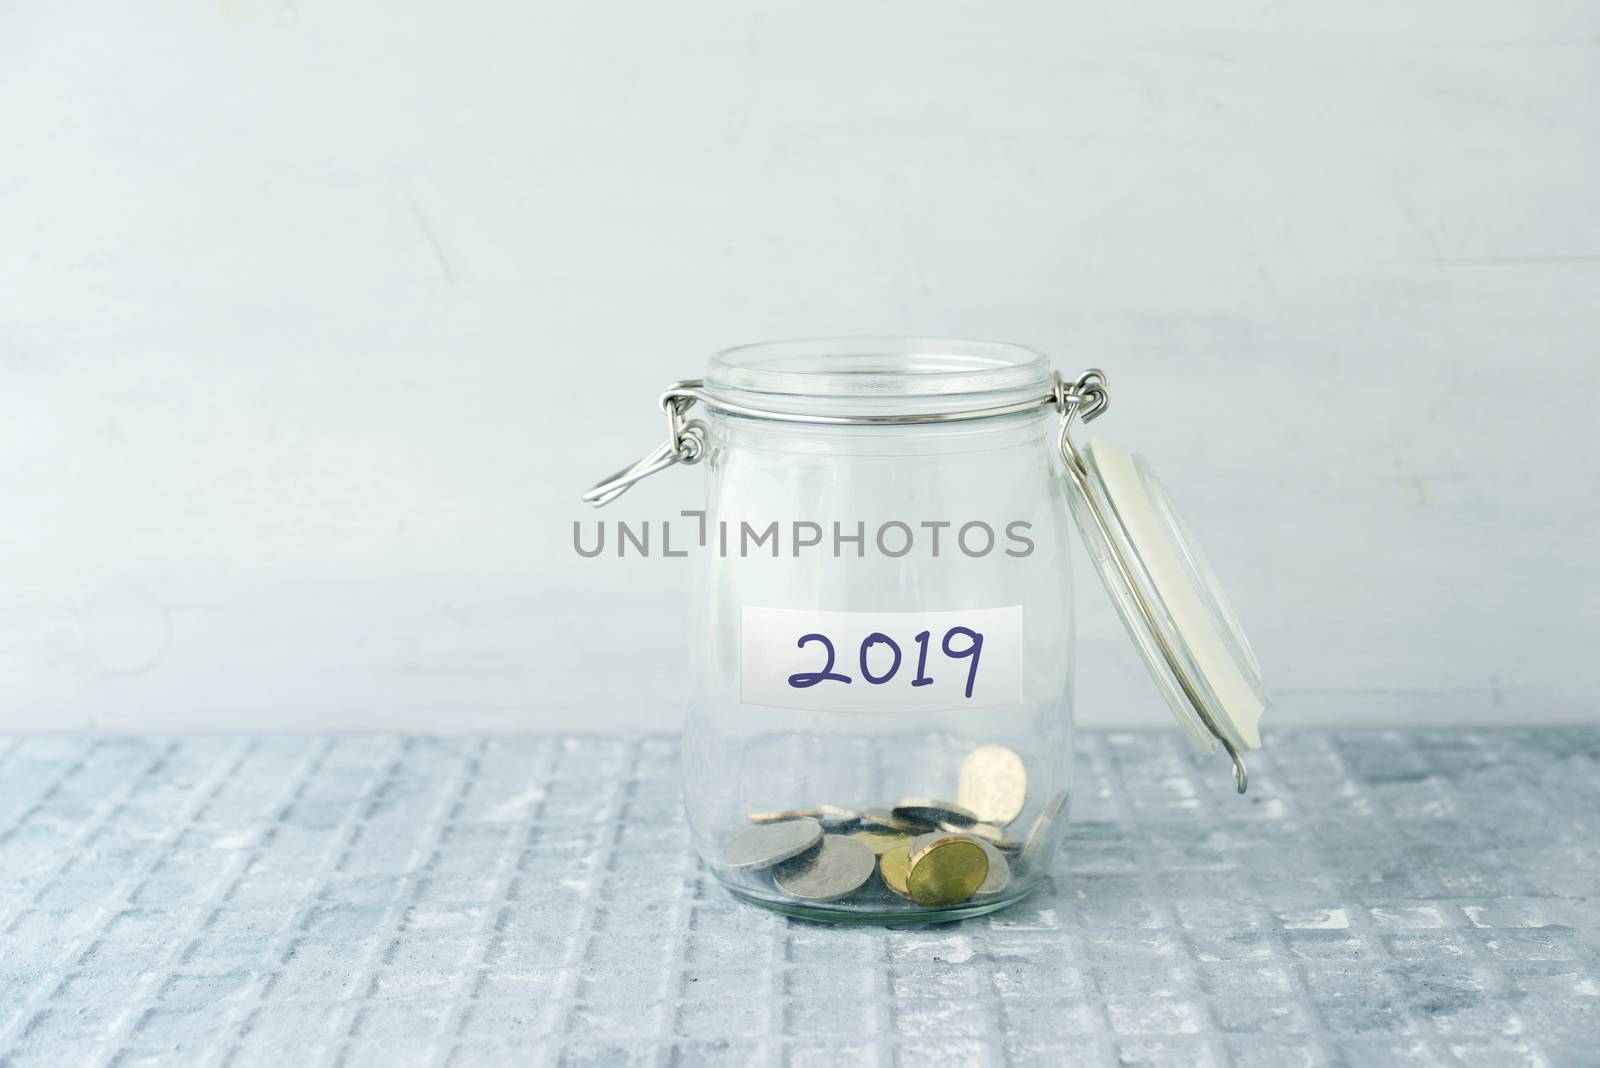 Empty glass money jar with 2019 label, financial concept.